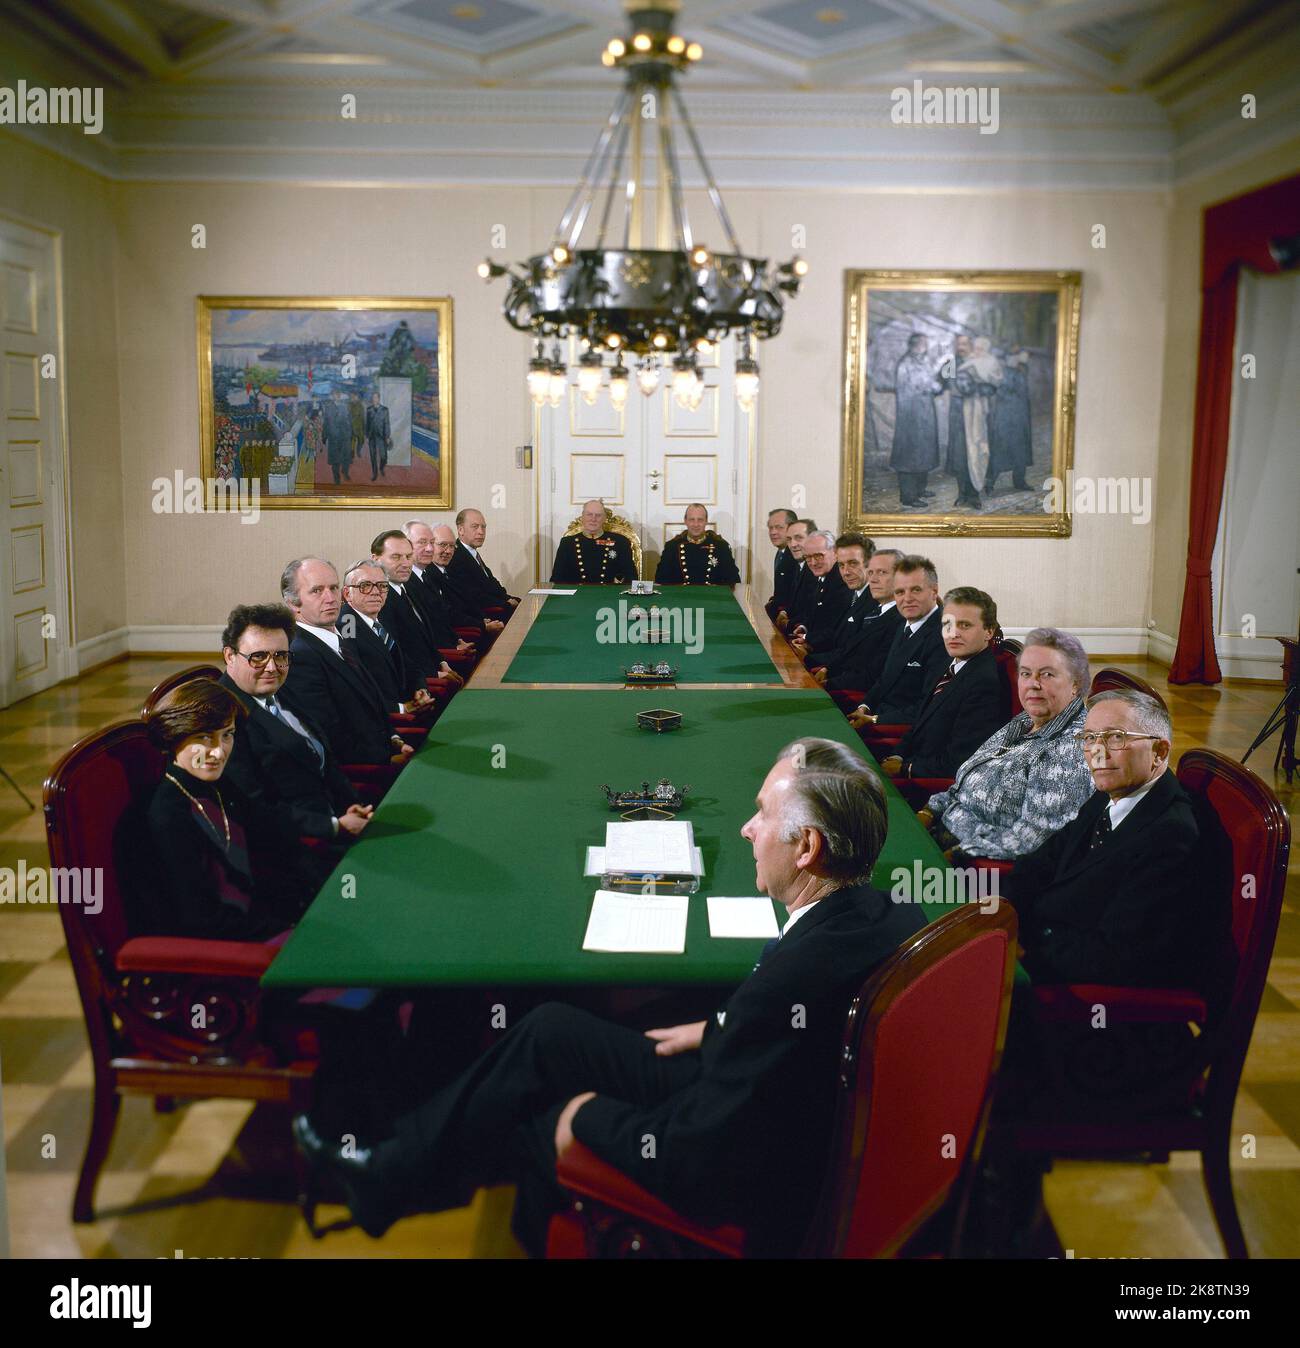 Oslo 1981-02: The Government Nordli. Labor Party government. Last Minister of State at the Castle, February 4, 1981. Prime Minister Odvar Nordli resigns for health reasons. Around the table from v Nordli, H.M. King Olav, H.K.H. Crown Prince Harald, Knut Frydenlund (Foreign Ministry), Eivind Bolle (FID), Oskar Øksnes (LD), Reiulf Steen (HSD), Lars Skytøen (Ind), Ronald Bye (SD), Einar Førde (Kud), Harriet Andreas and Arvid Johansen (OED). At the end of the table expedition manager Dag Berggrav at the Prime Minister's Office. Photo: NTB / NTB Stock Photo